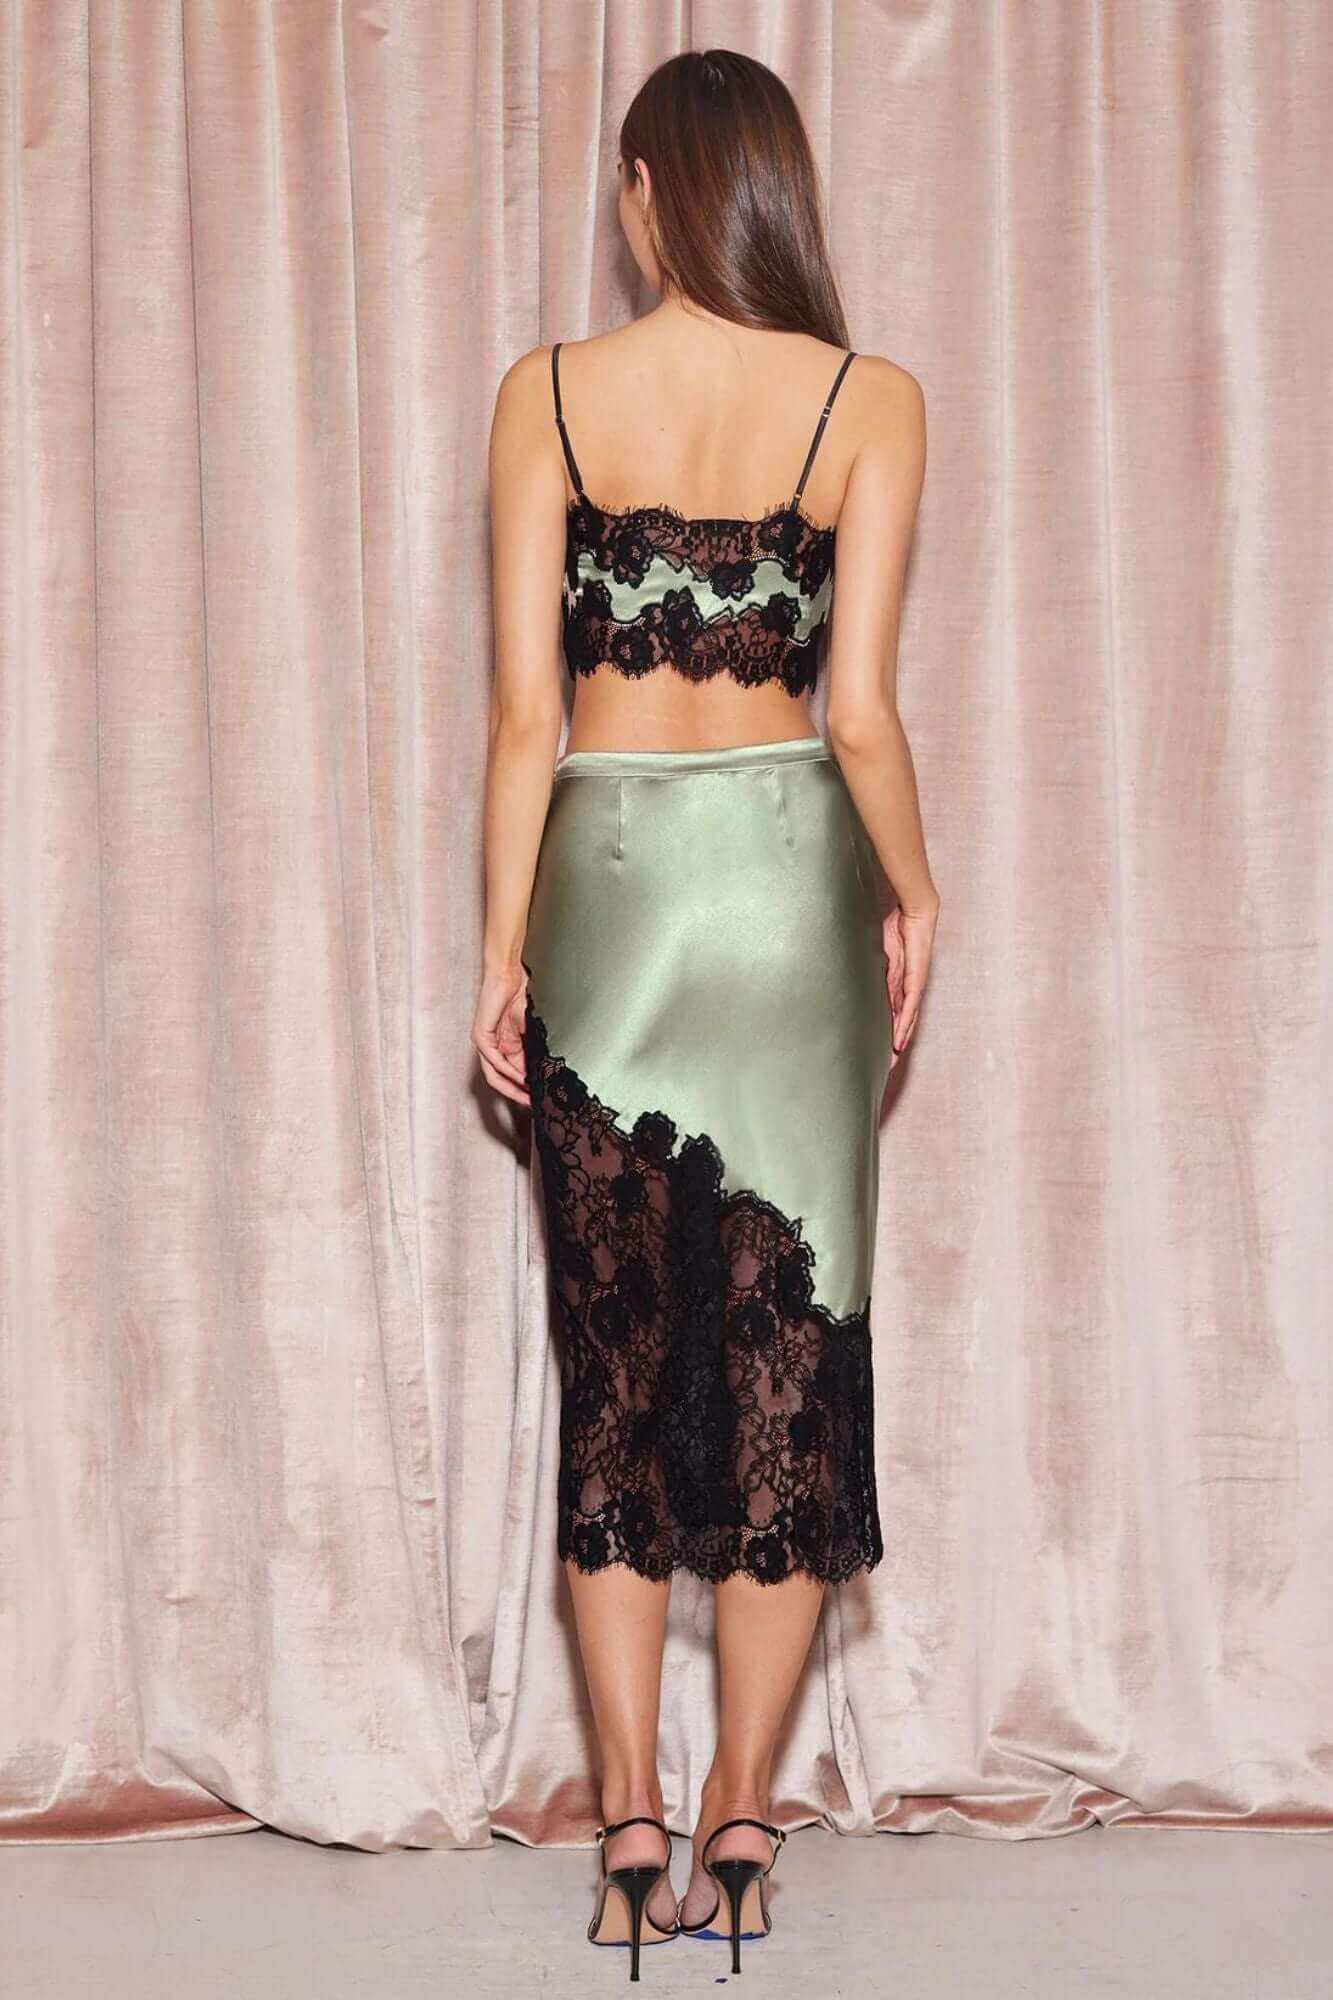 Silk and Lace Scallop Midi Skirt in Olive Green